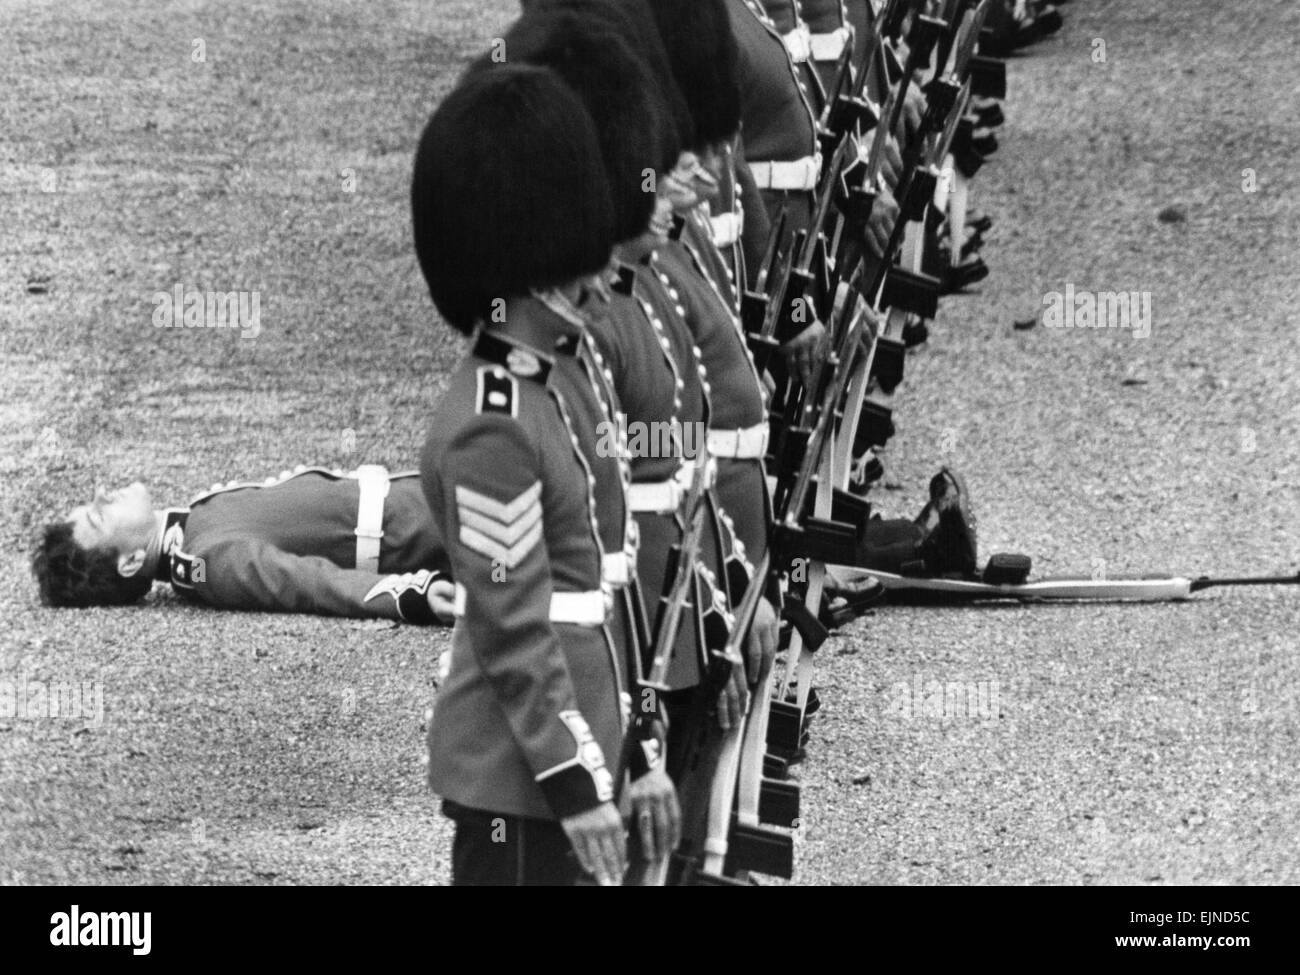 The Wobblies: Parading guardsmen threw a fit of the wobblies on Saturday (9-6-79). The weather was go humid they just could not toe the line during the final rehearsal for the Trooping the Colour ceremony in London on Saturday (16-6-79). In an unguarded moment, two young soldiers fainted. Thousands of tourists, crammed into Horse Guards Parade, watched as the two were carried away on stretchers - and the thin red line became a little thinner. Unguarded Moment....It's all too much for this guard, as he hits the deck. 9th June 1979 Stock Photo